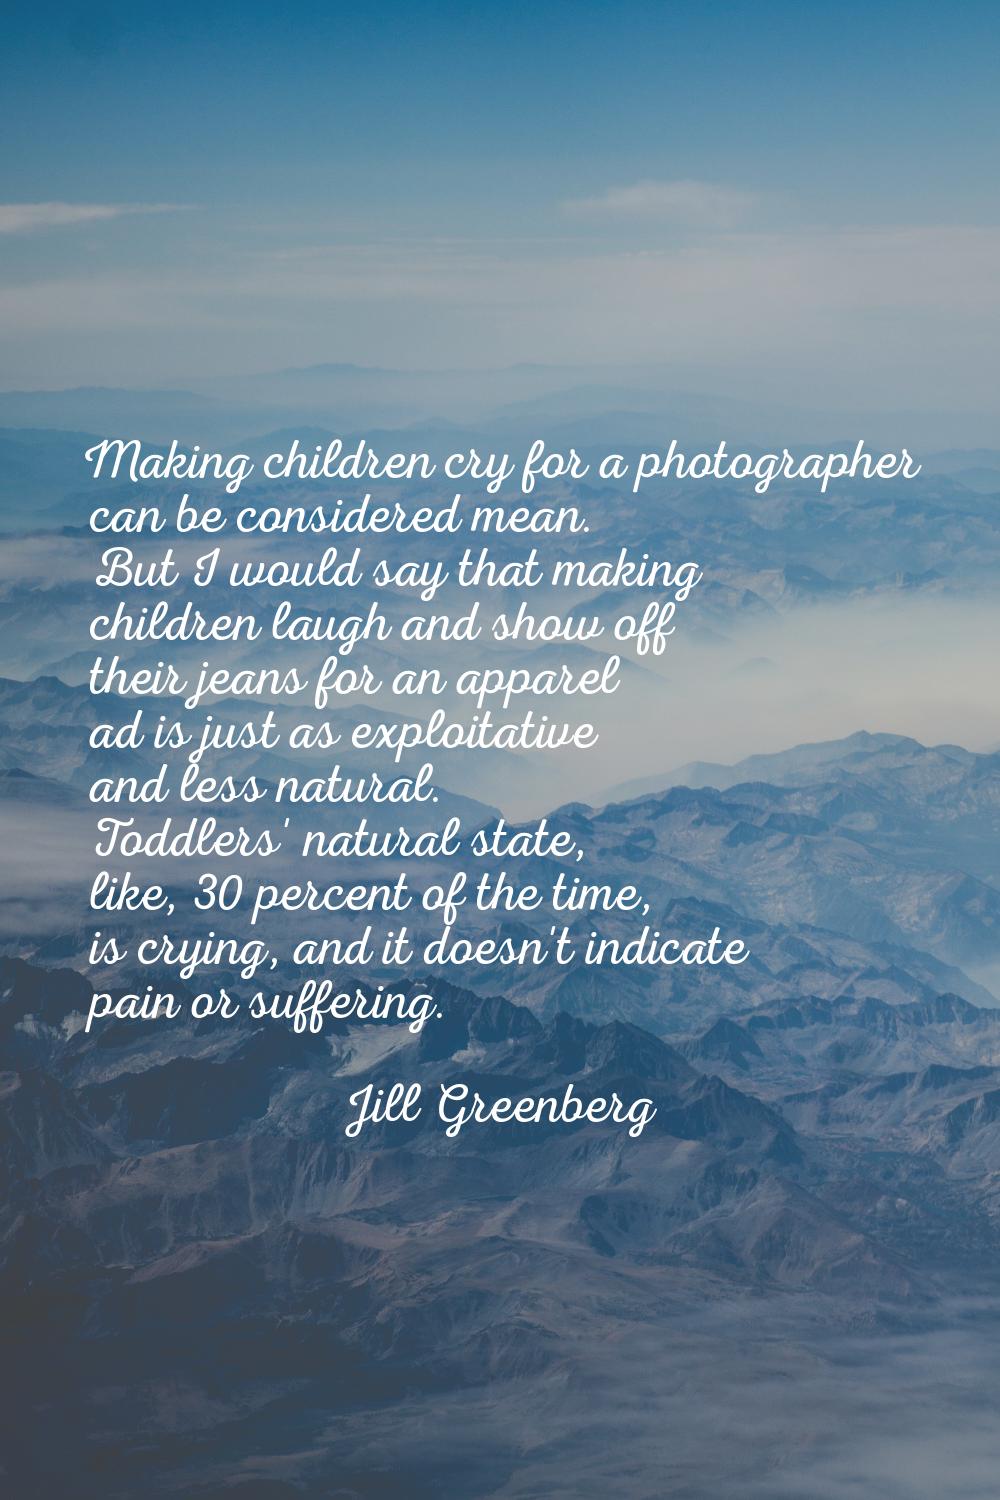 Making children cry for a photographer can be considered mean. But I would say that making children